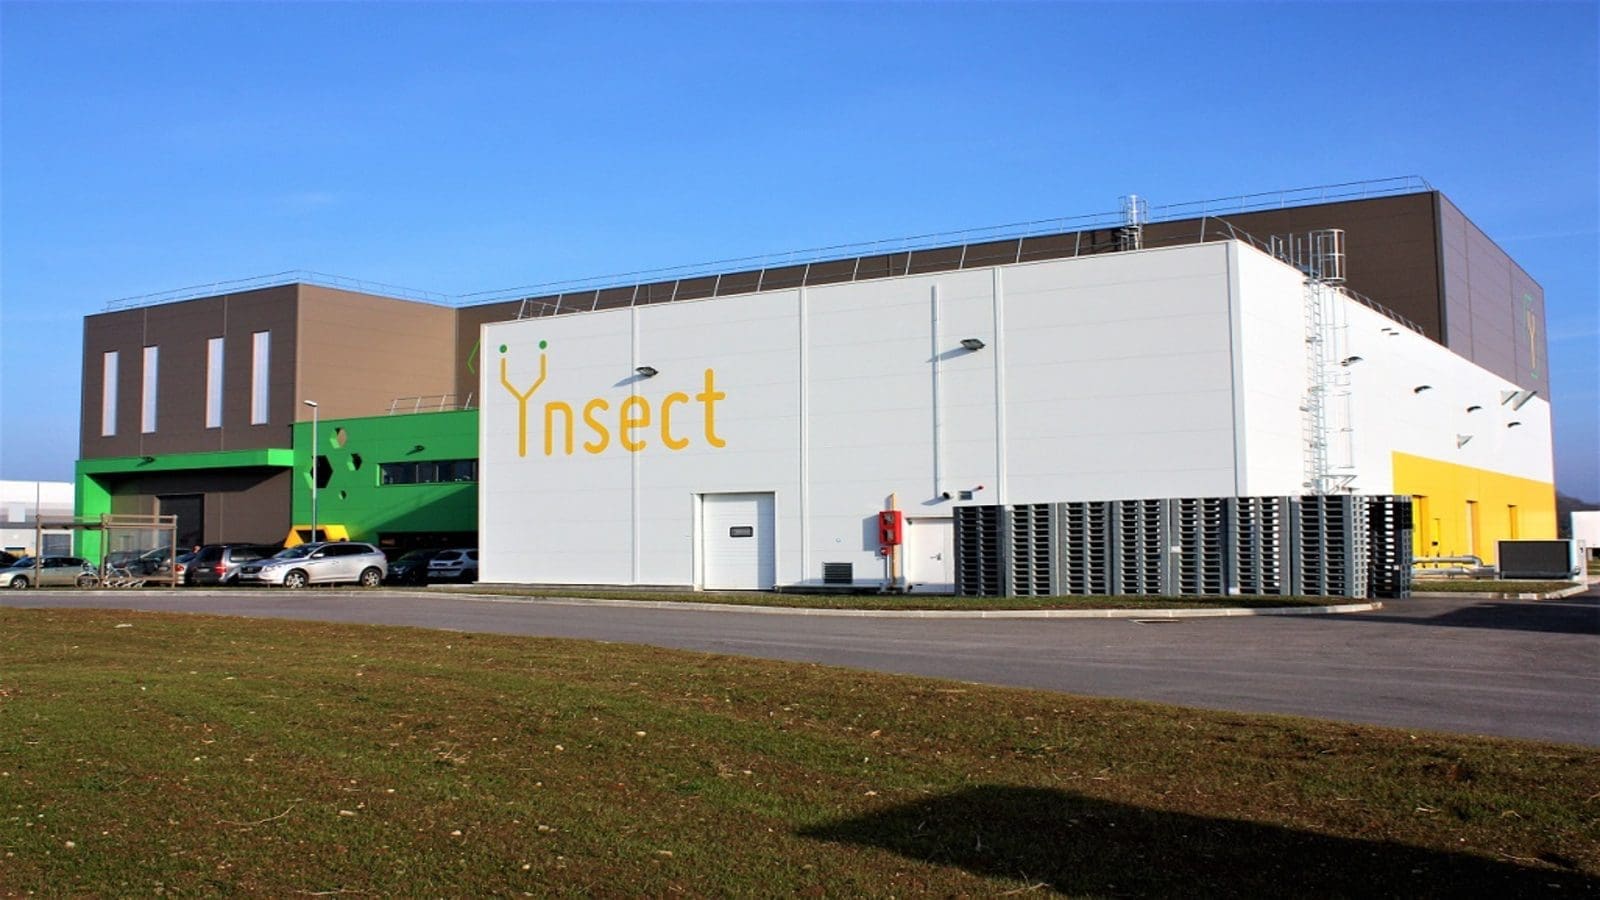 Ynsect partners ADM, Corporativo Kosmos in US$106m North American expansion drive